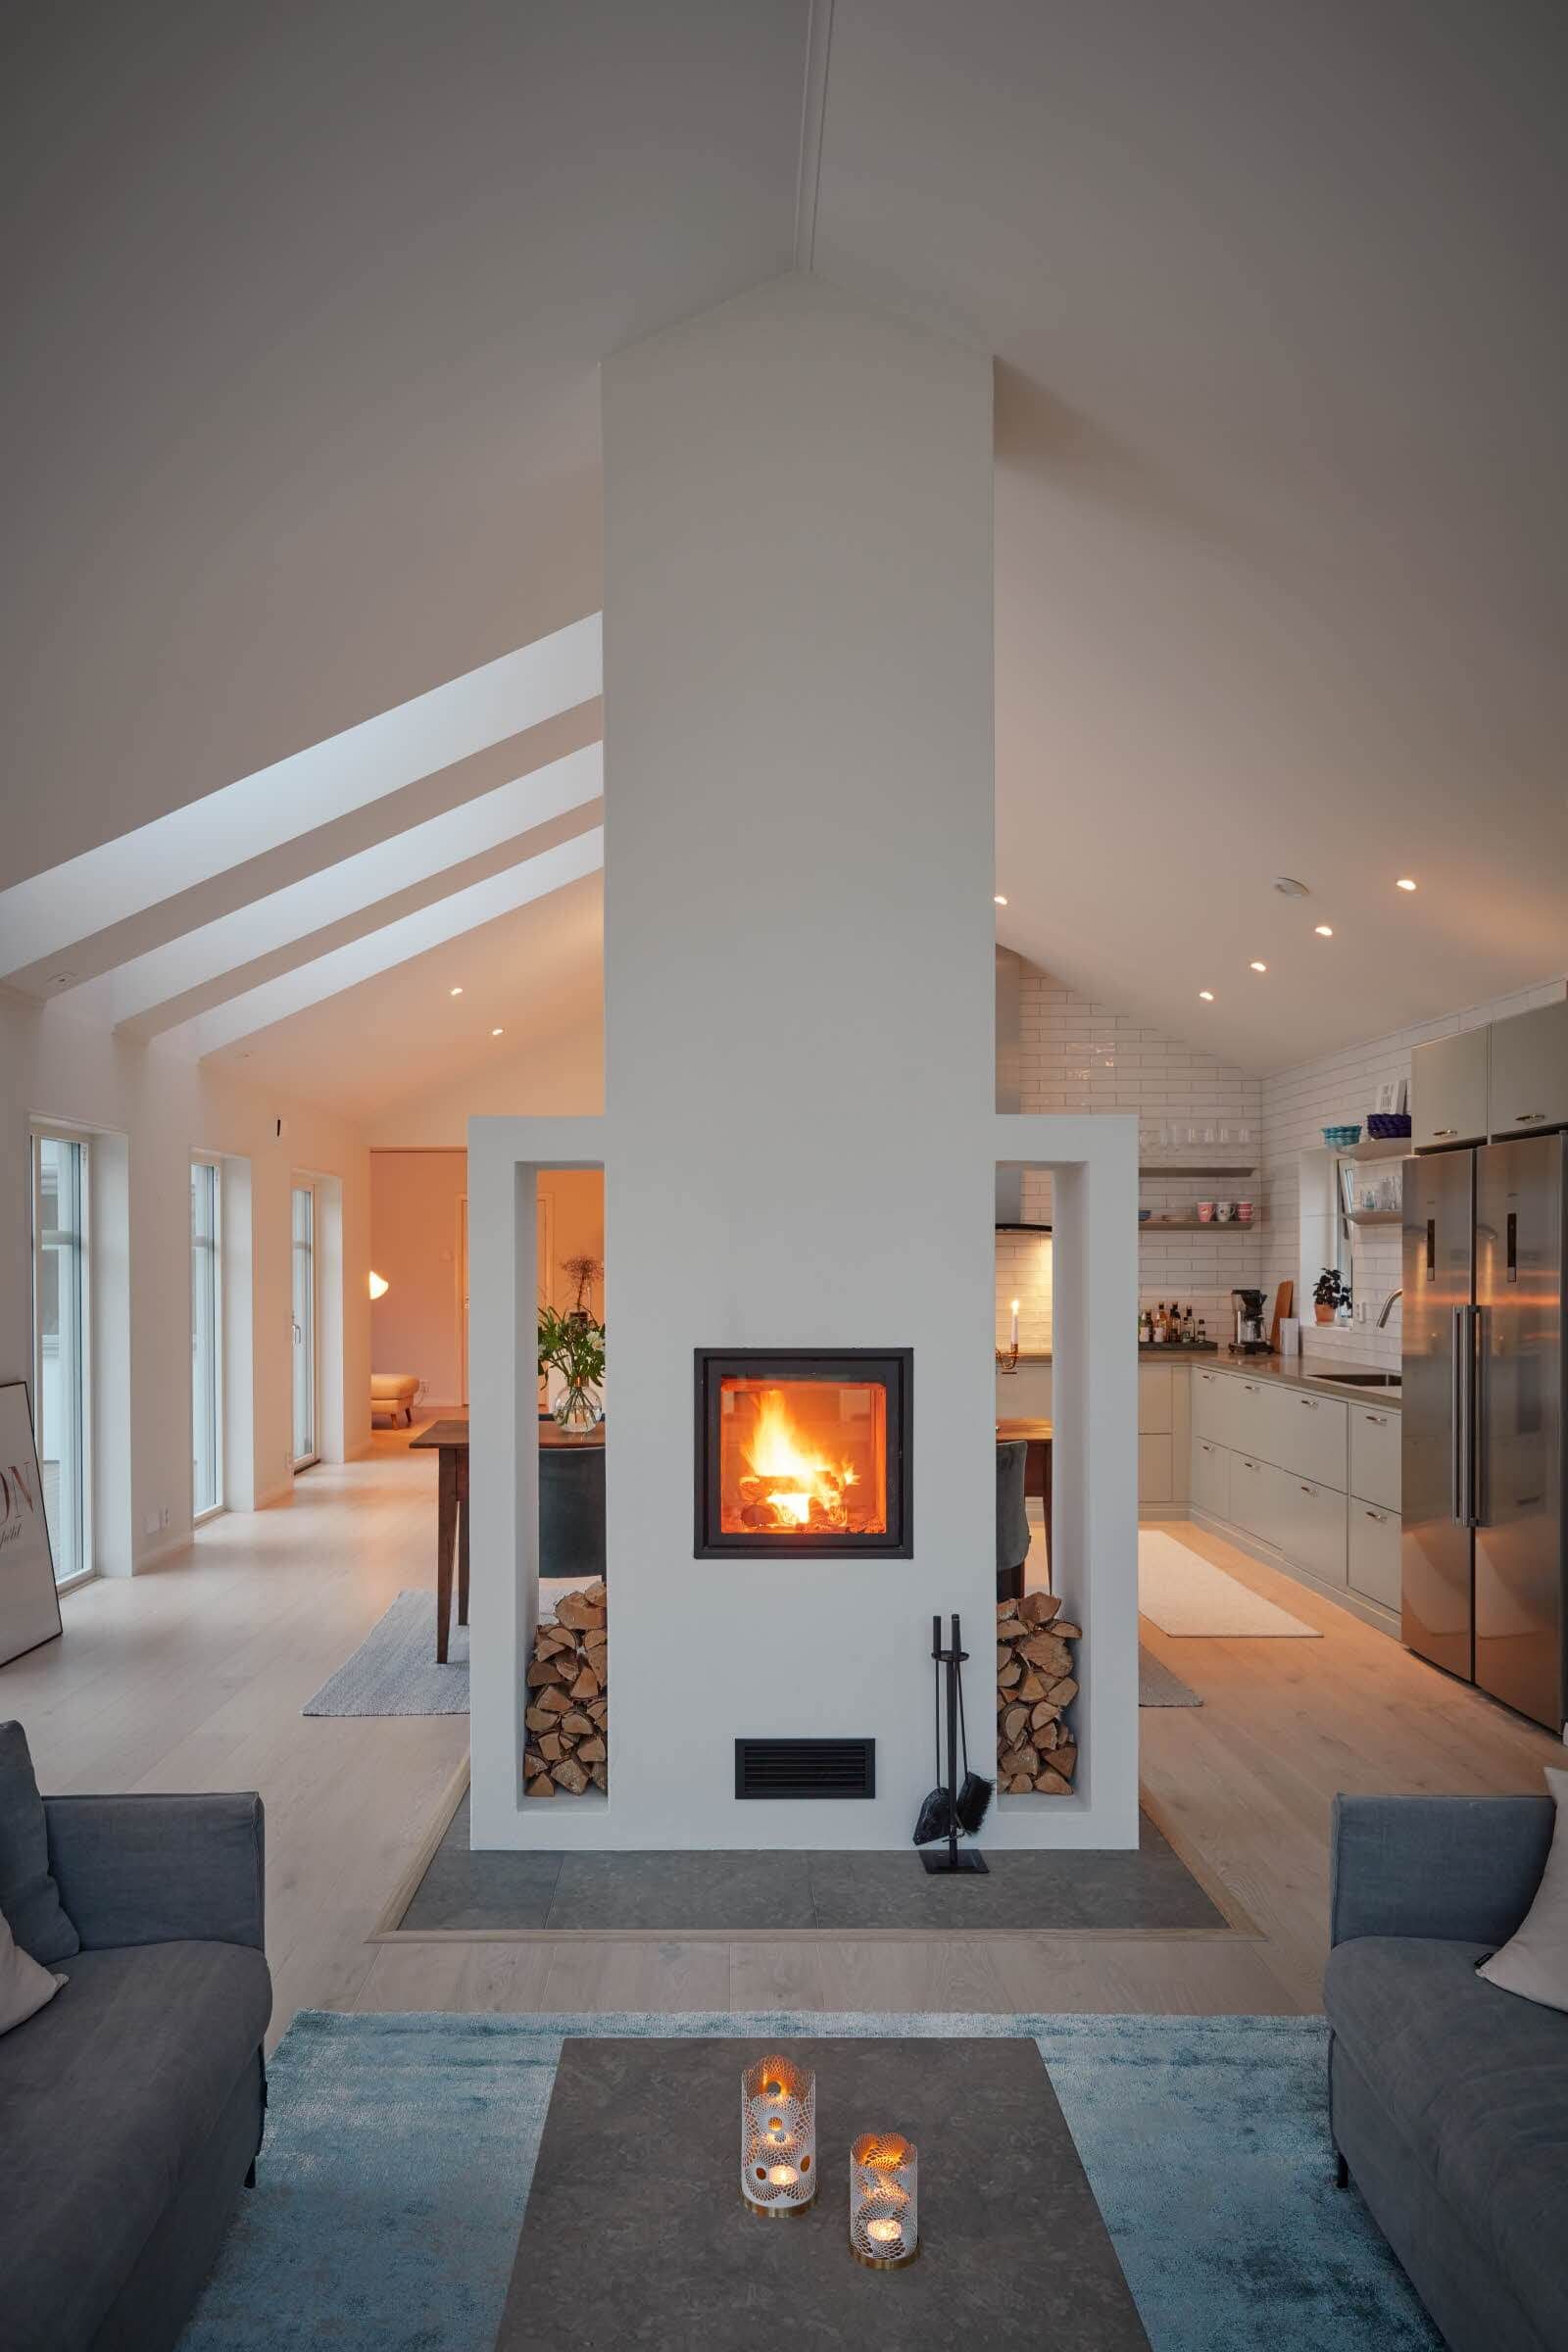 Fireplace Designer Inspirational 16 Gorgeous Double Sided Fireplace Design Ideas Take A Look